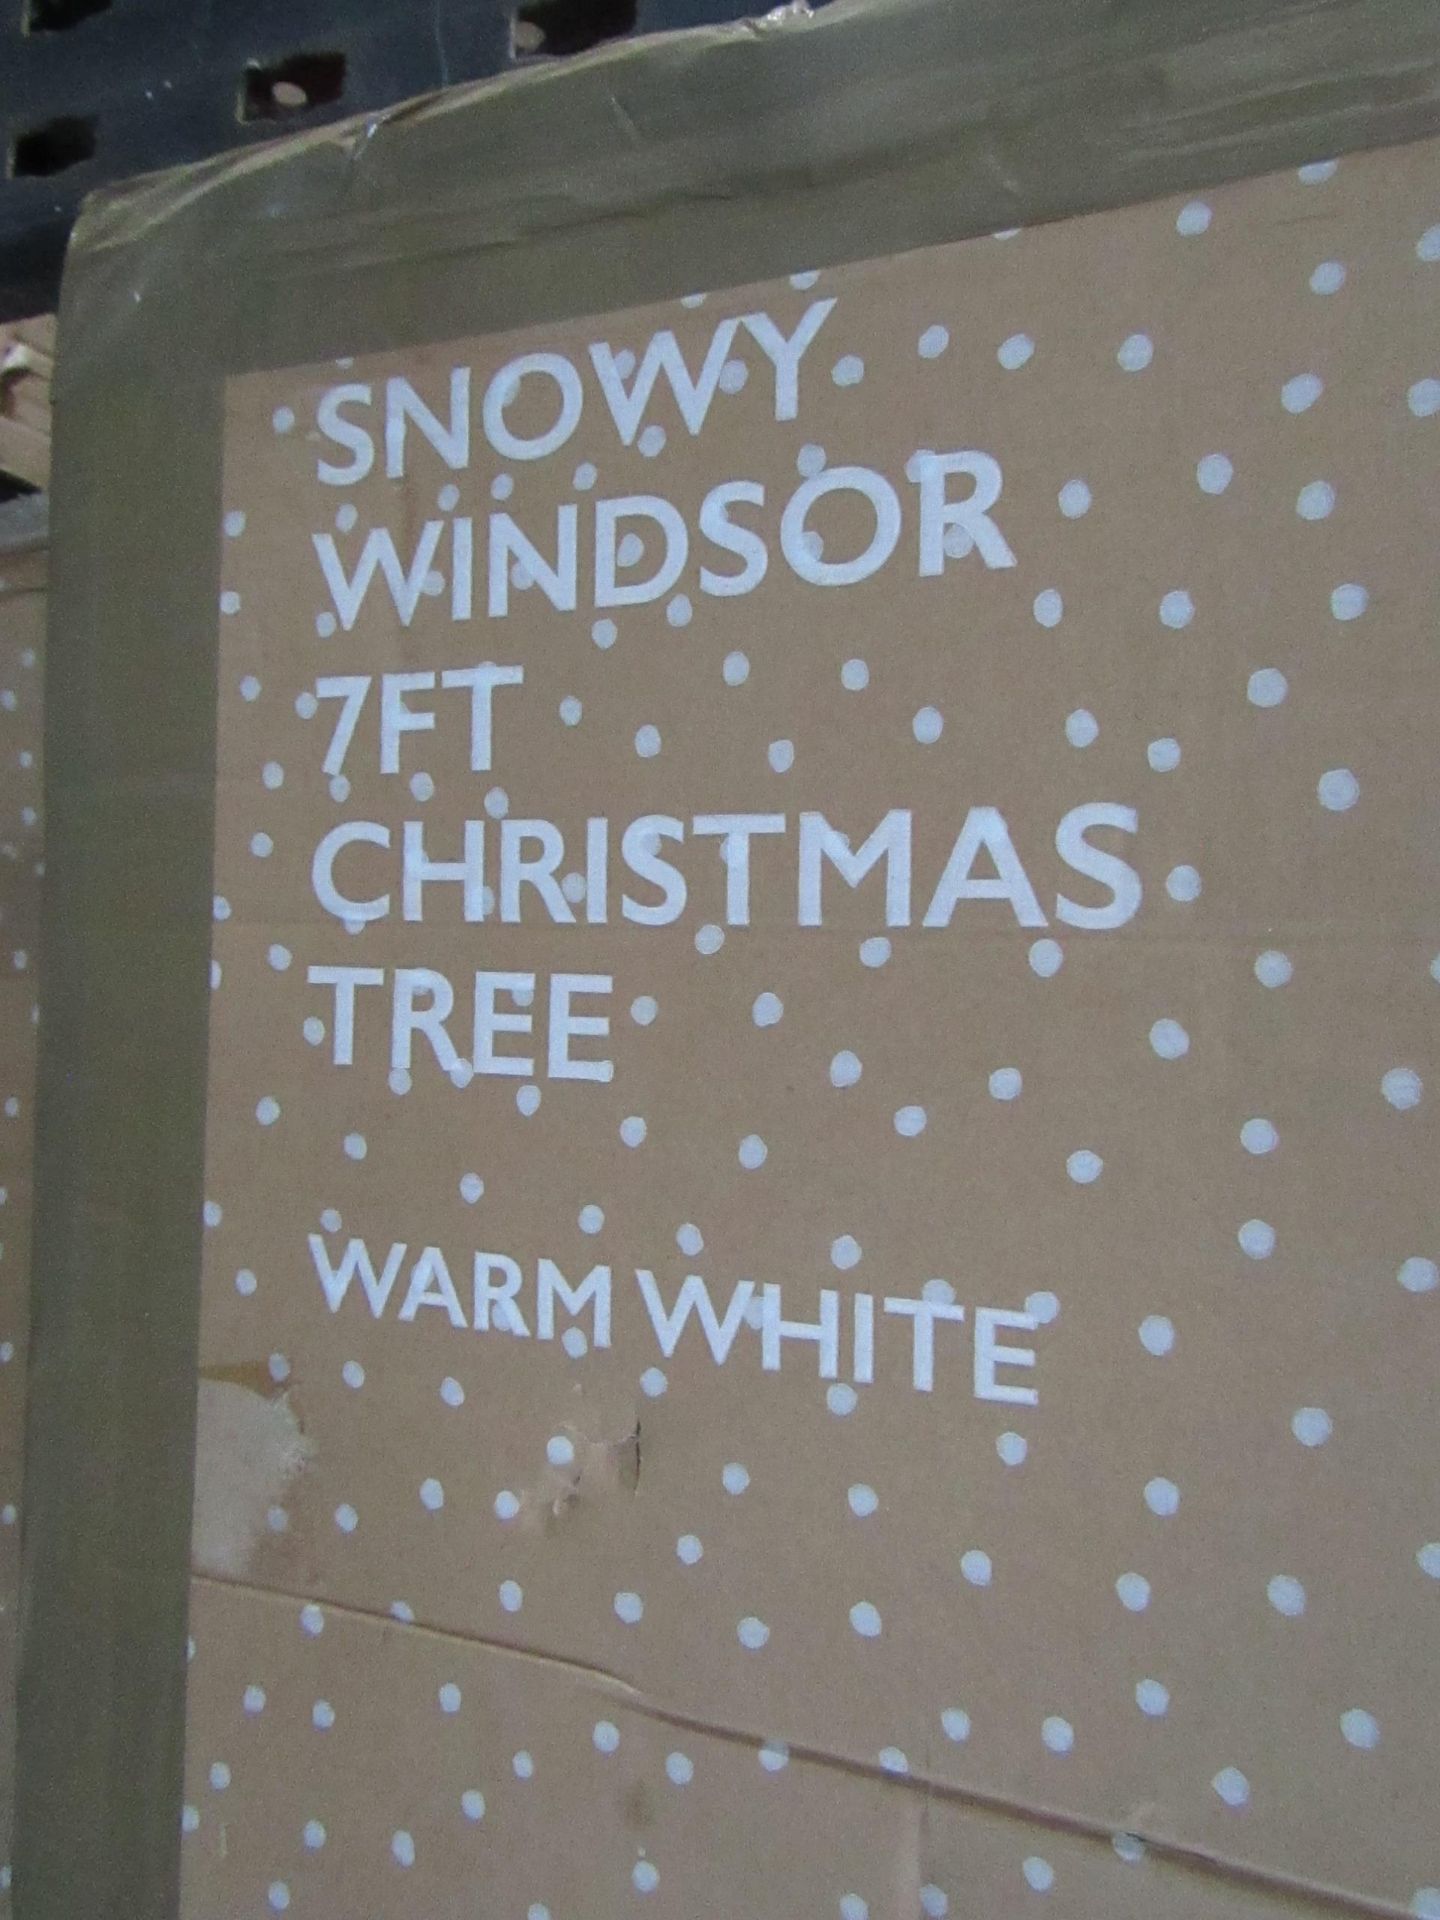 Celebright - Snowy Windsor 7Ft Christmas Tree Warm White - Unchecked & Boxed.